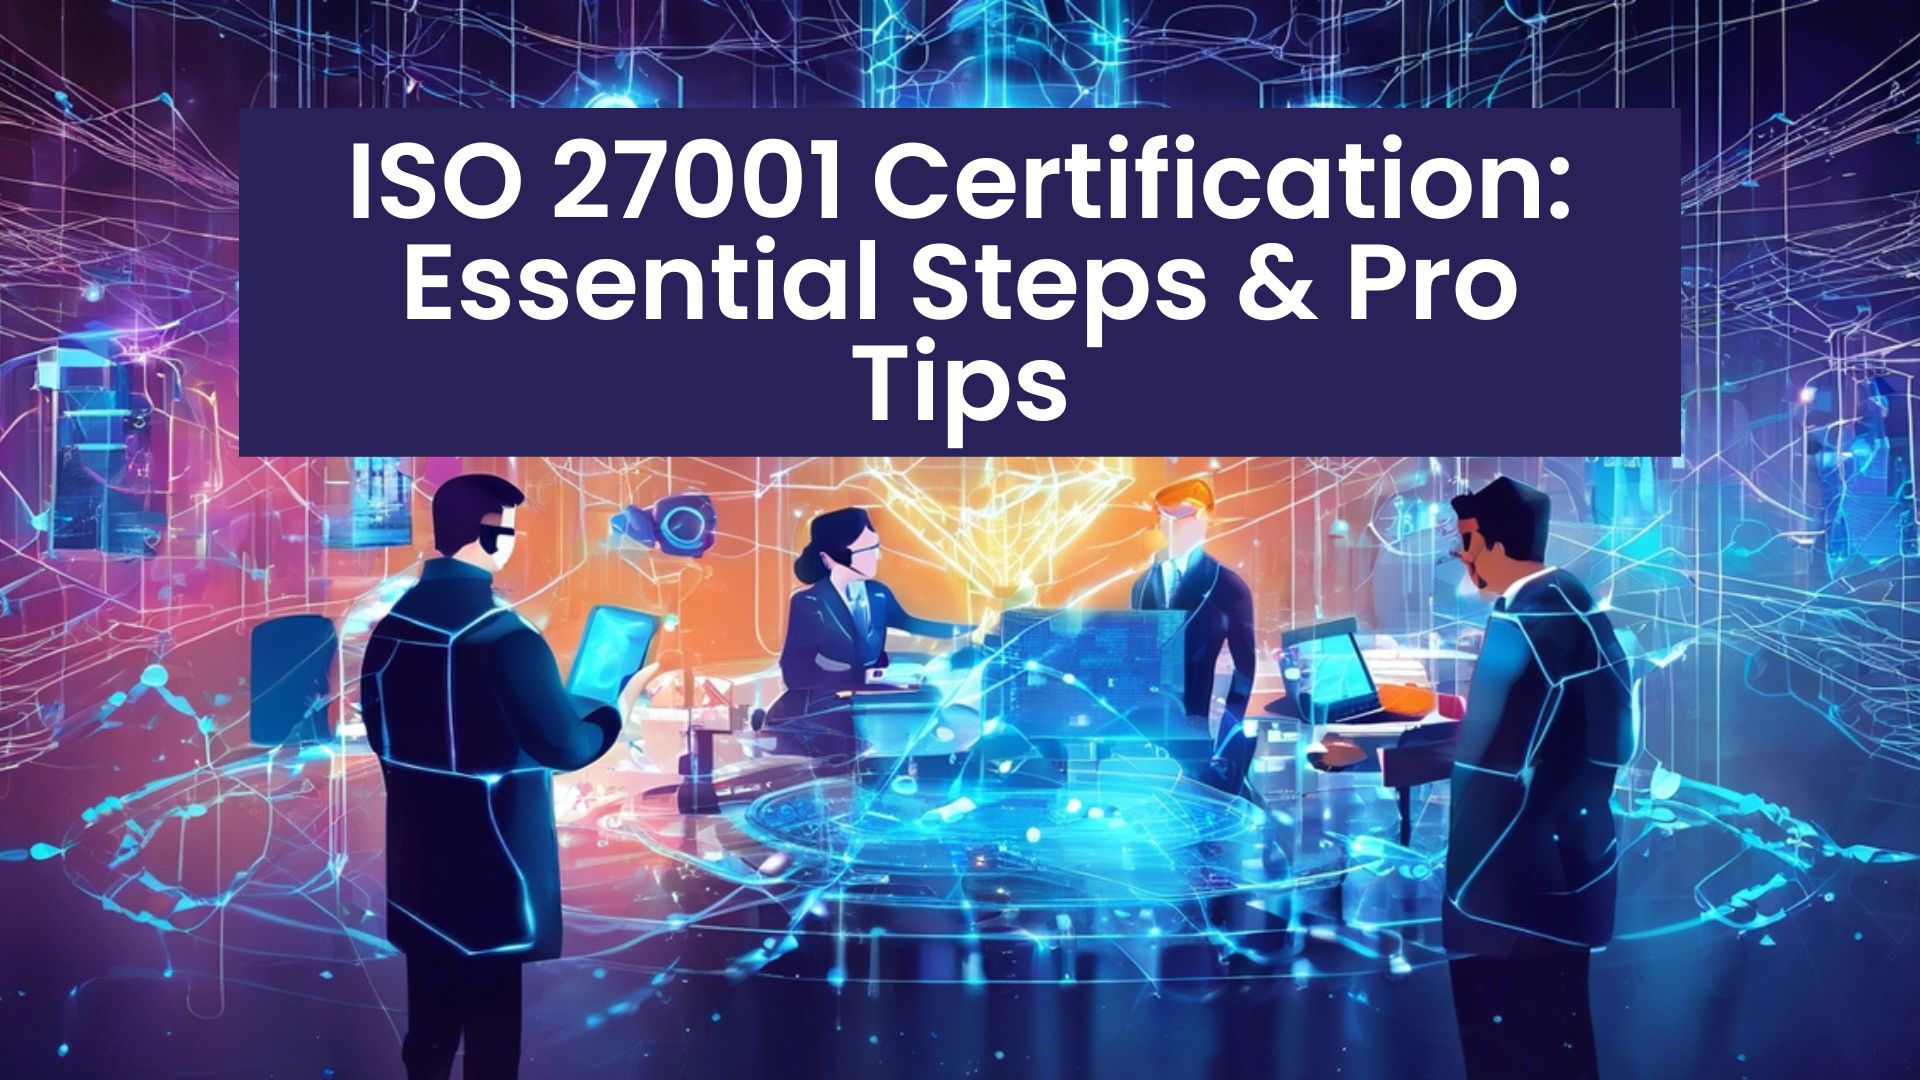 ISO 27001 Certification Essential Steps & Pro Tips